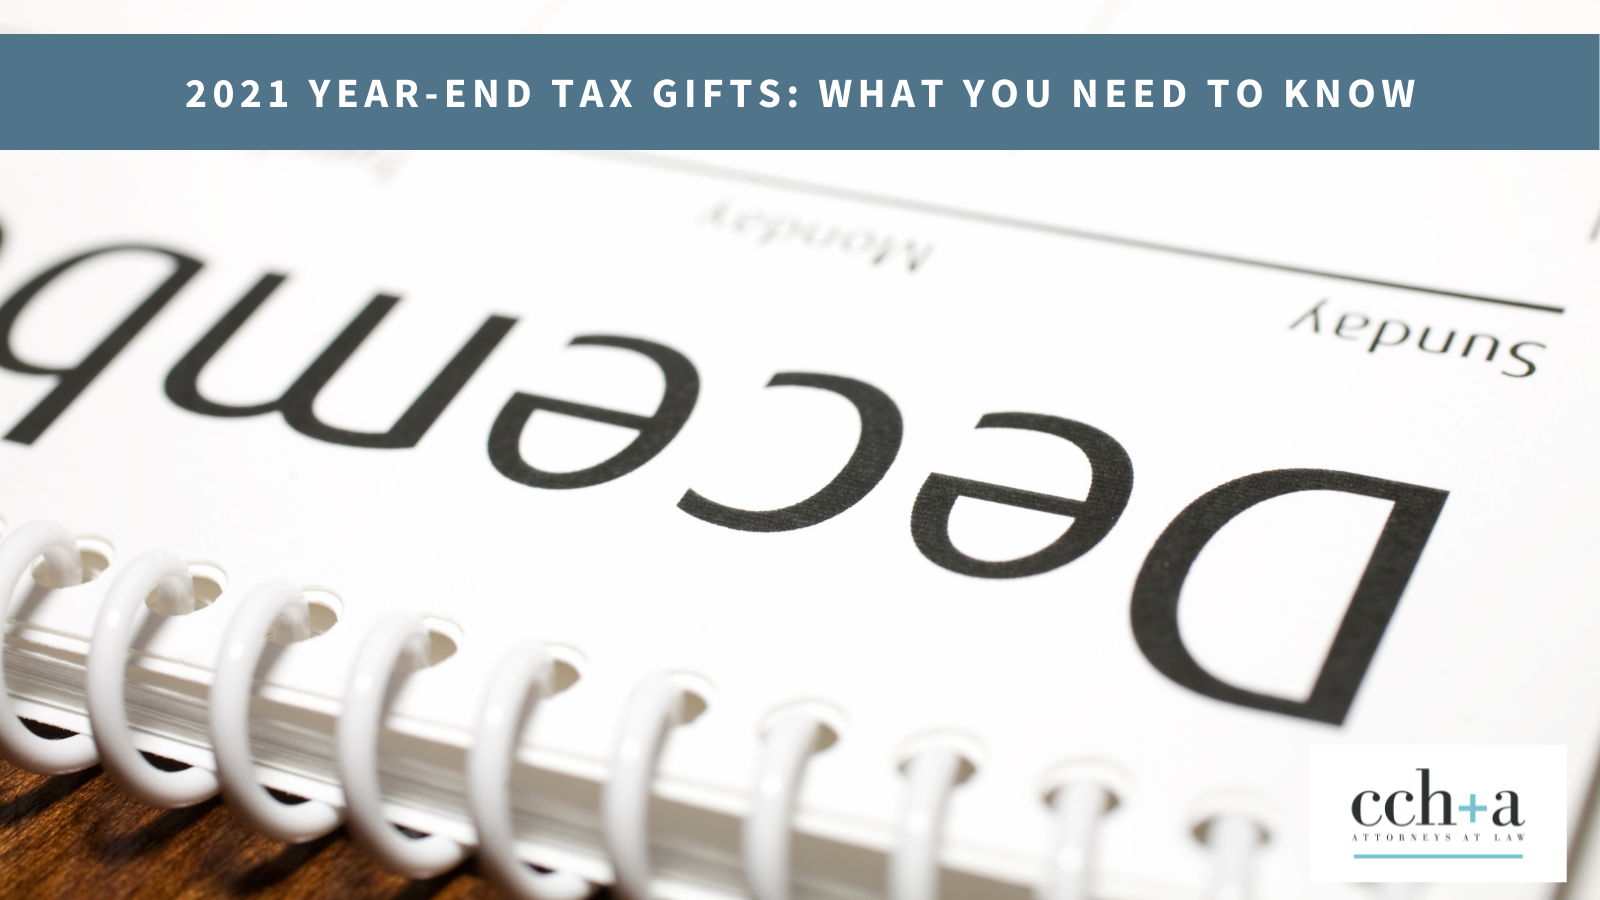 Ccha november 2021 2021 Year End Tax Gifts What You Need To Know